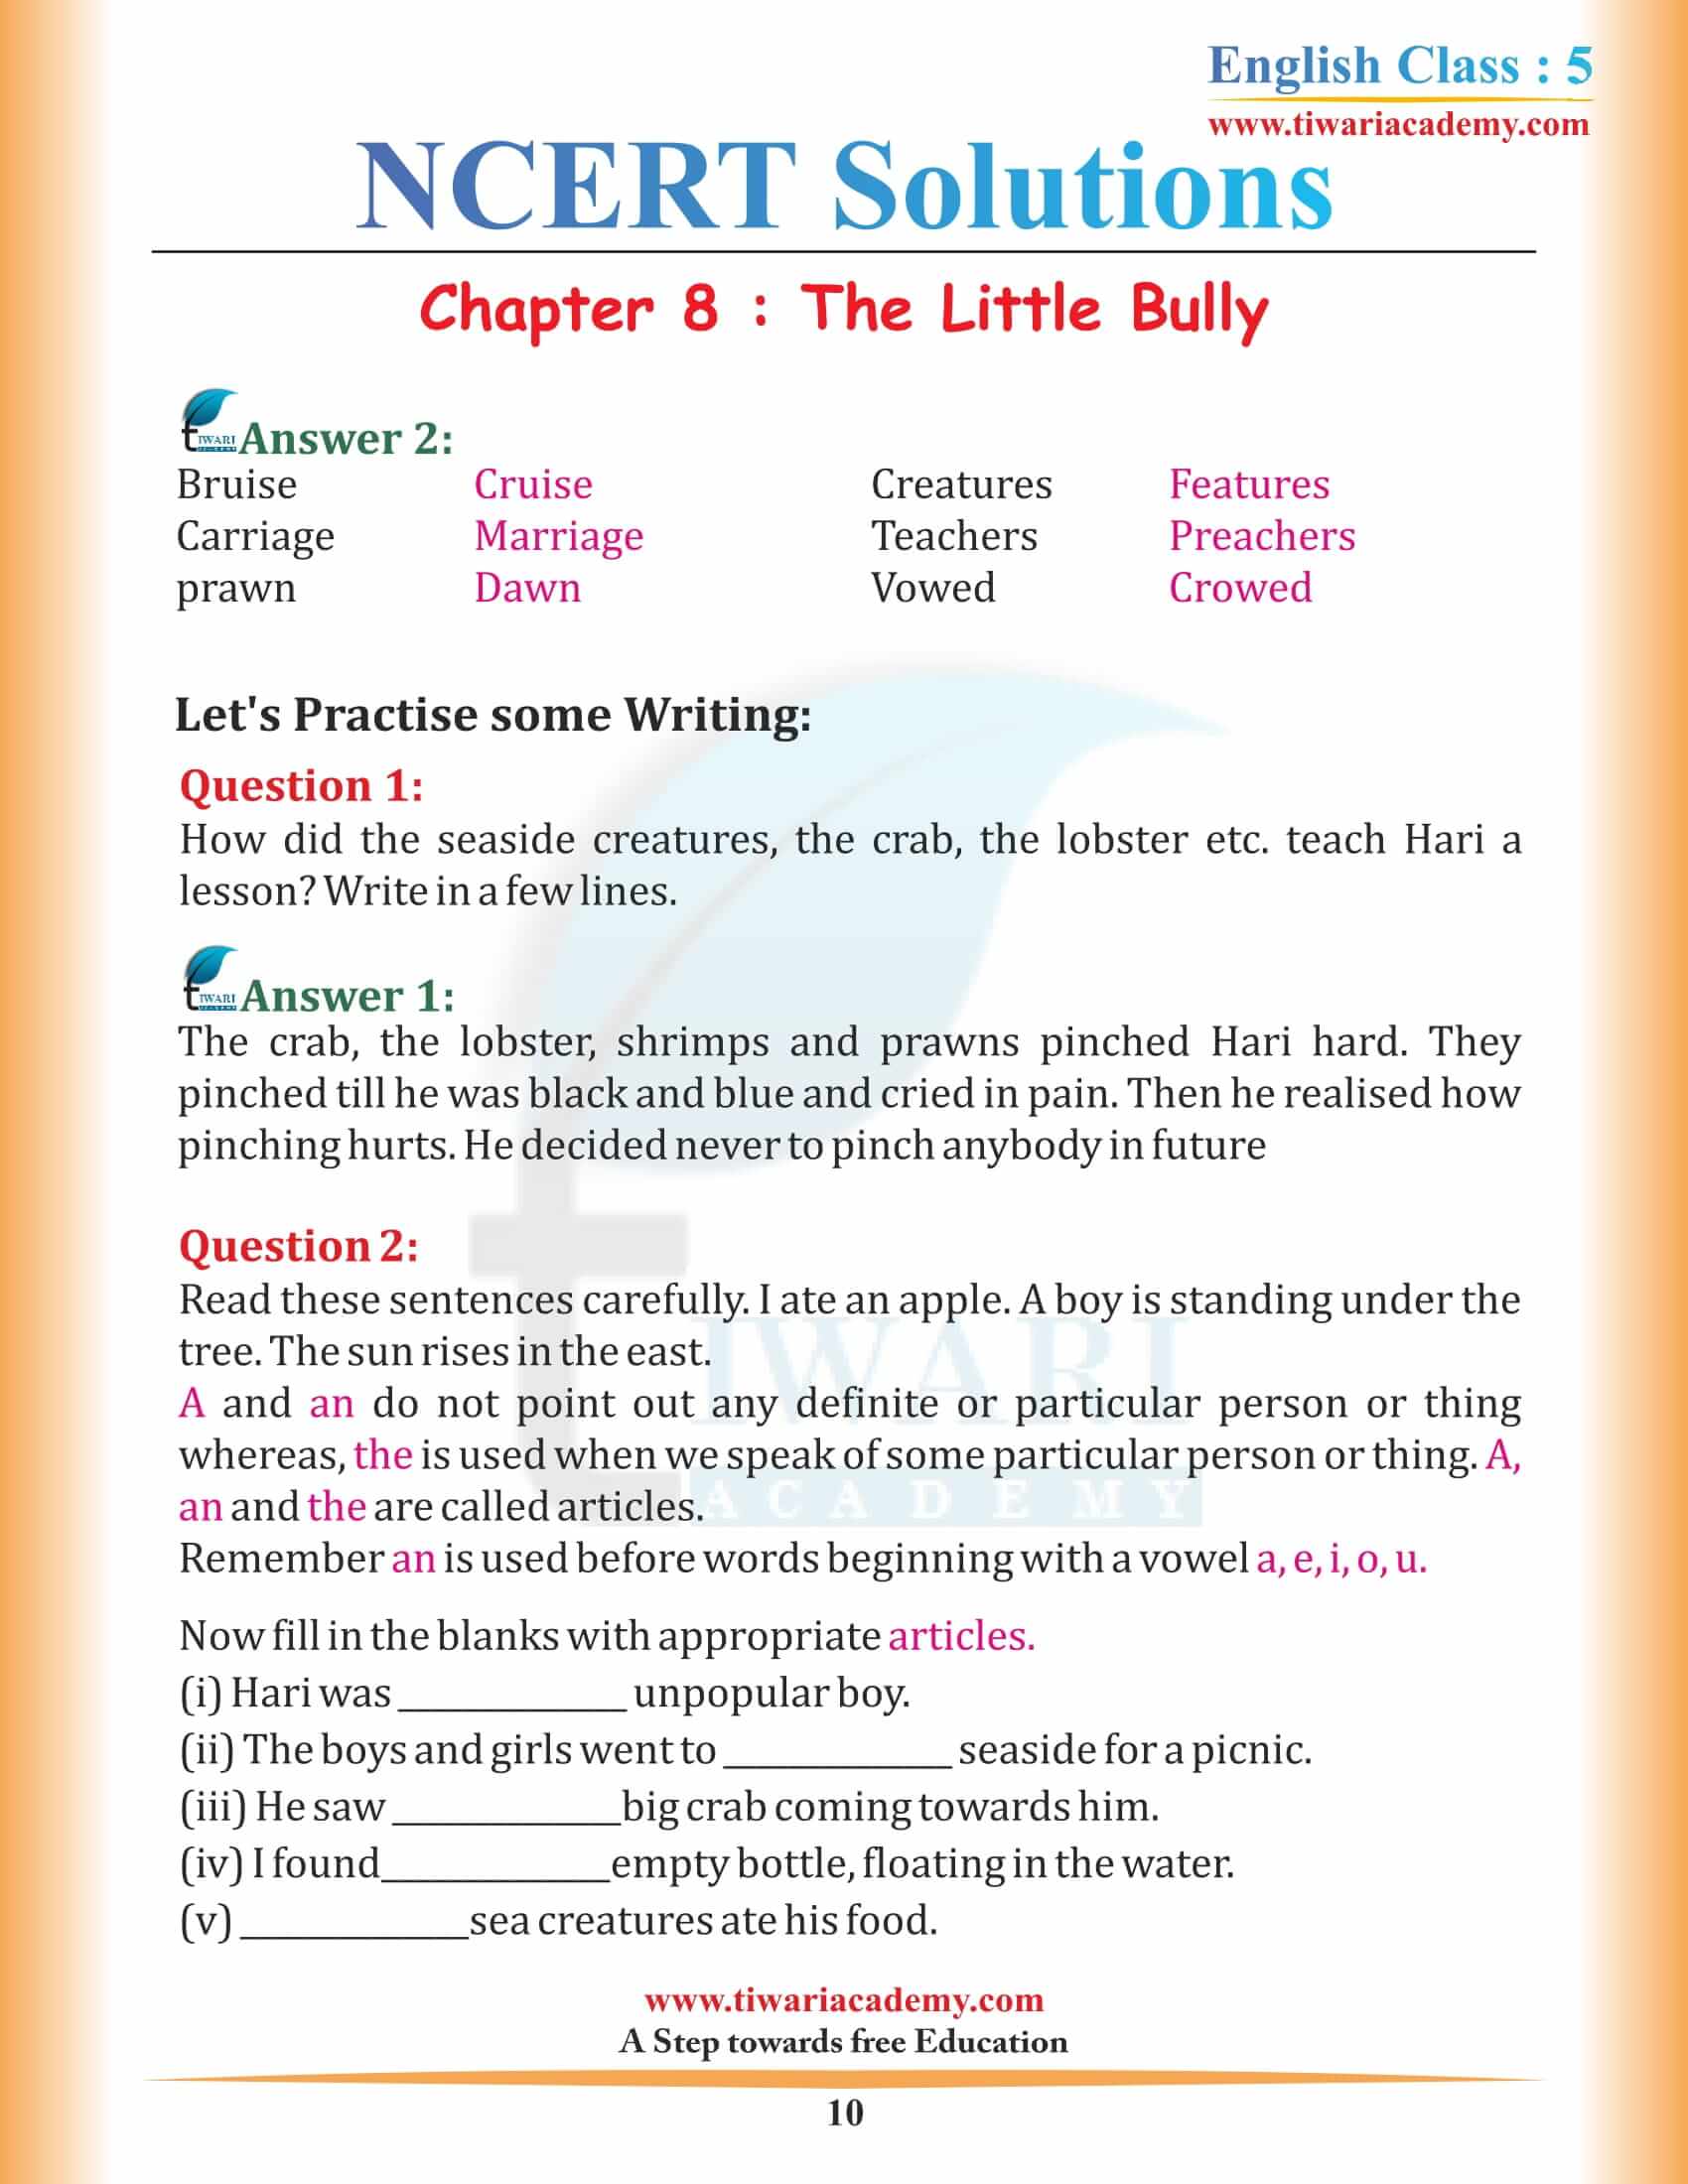 NCERT Solutions for Class 5 English Chapter 8 The Little Bully HIndi Download